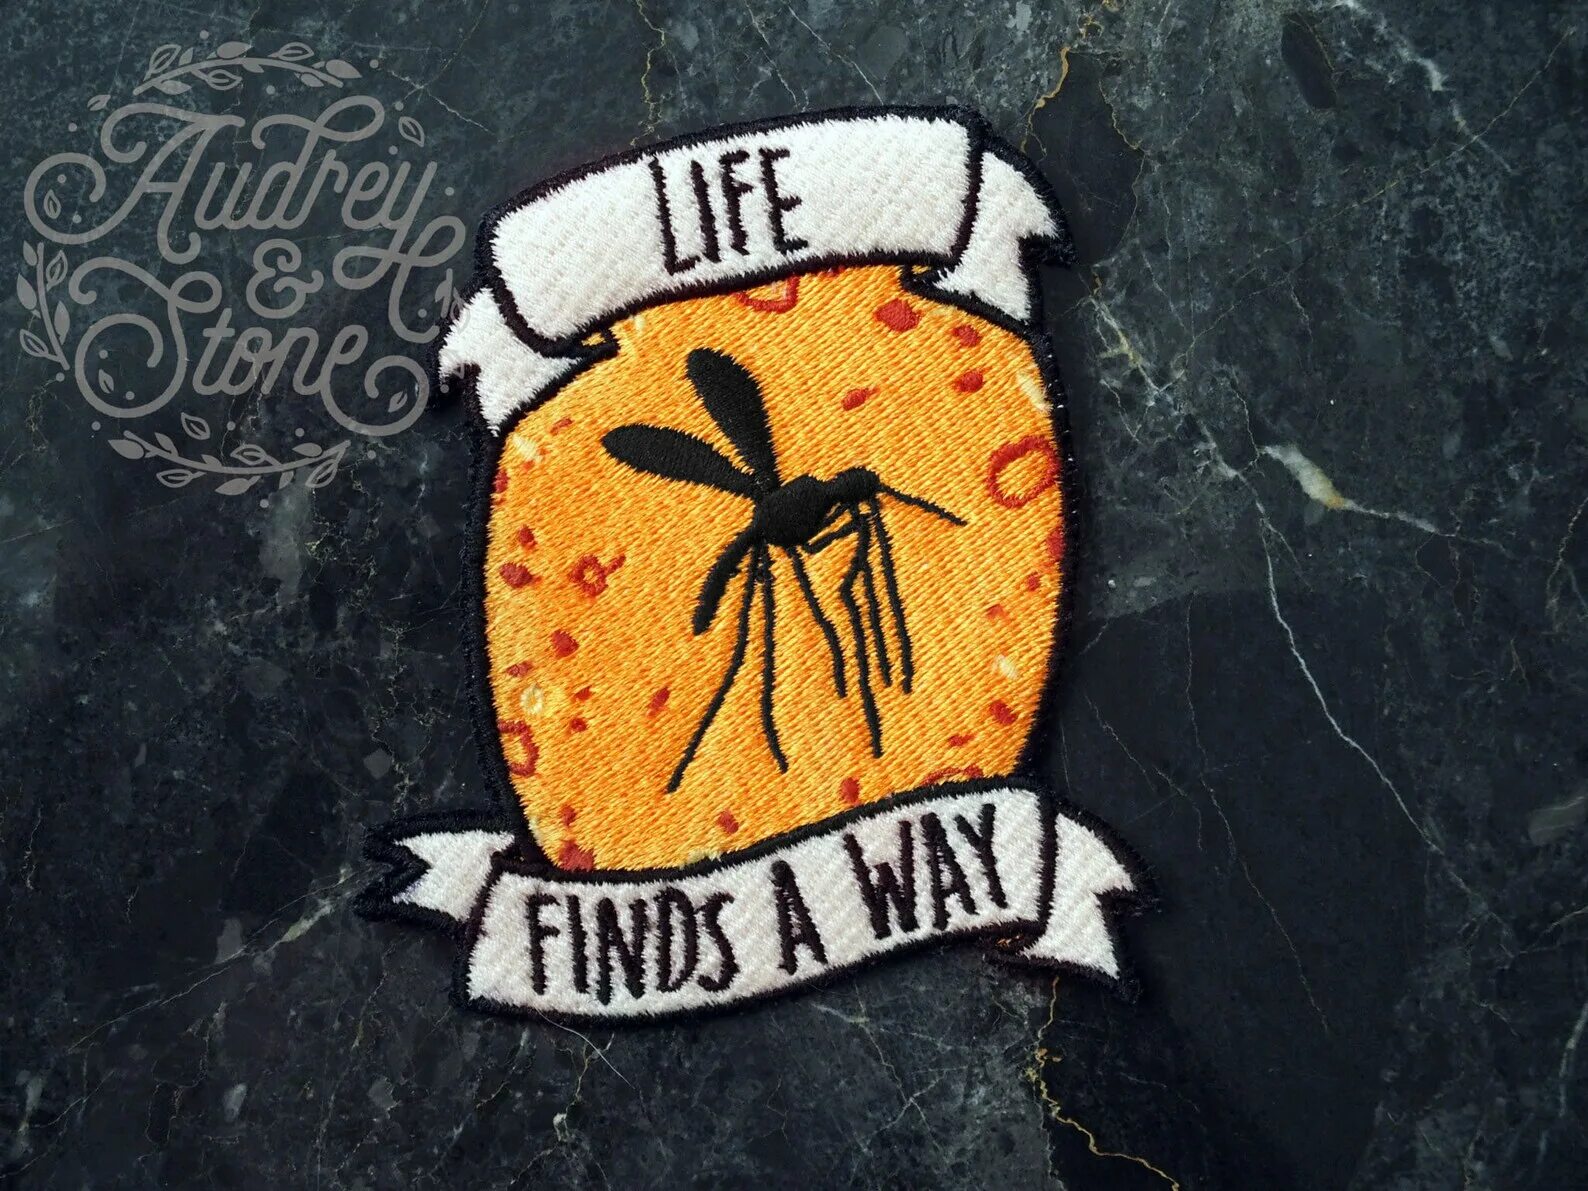 Life finds a way. Картинки правды жизни для патча. Life Patch. Jurassic butts. Life Patch Dynamic.